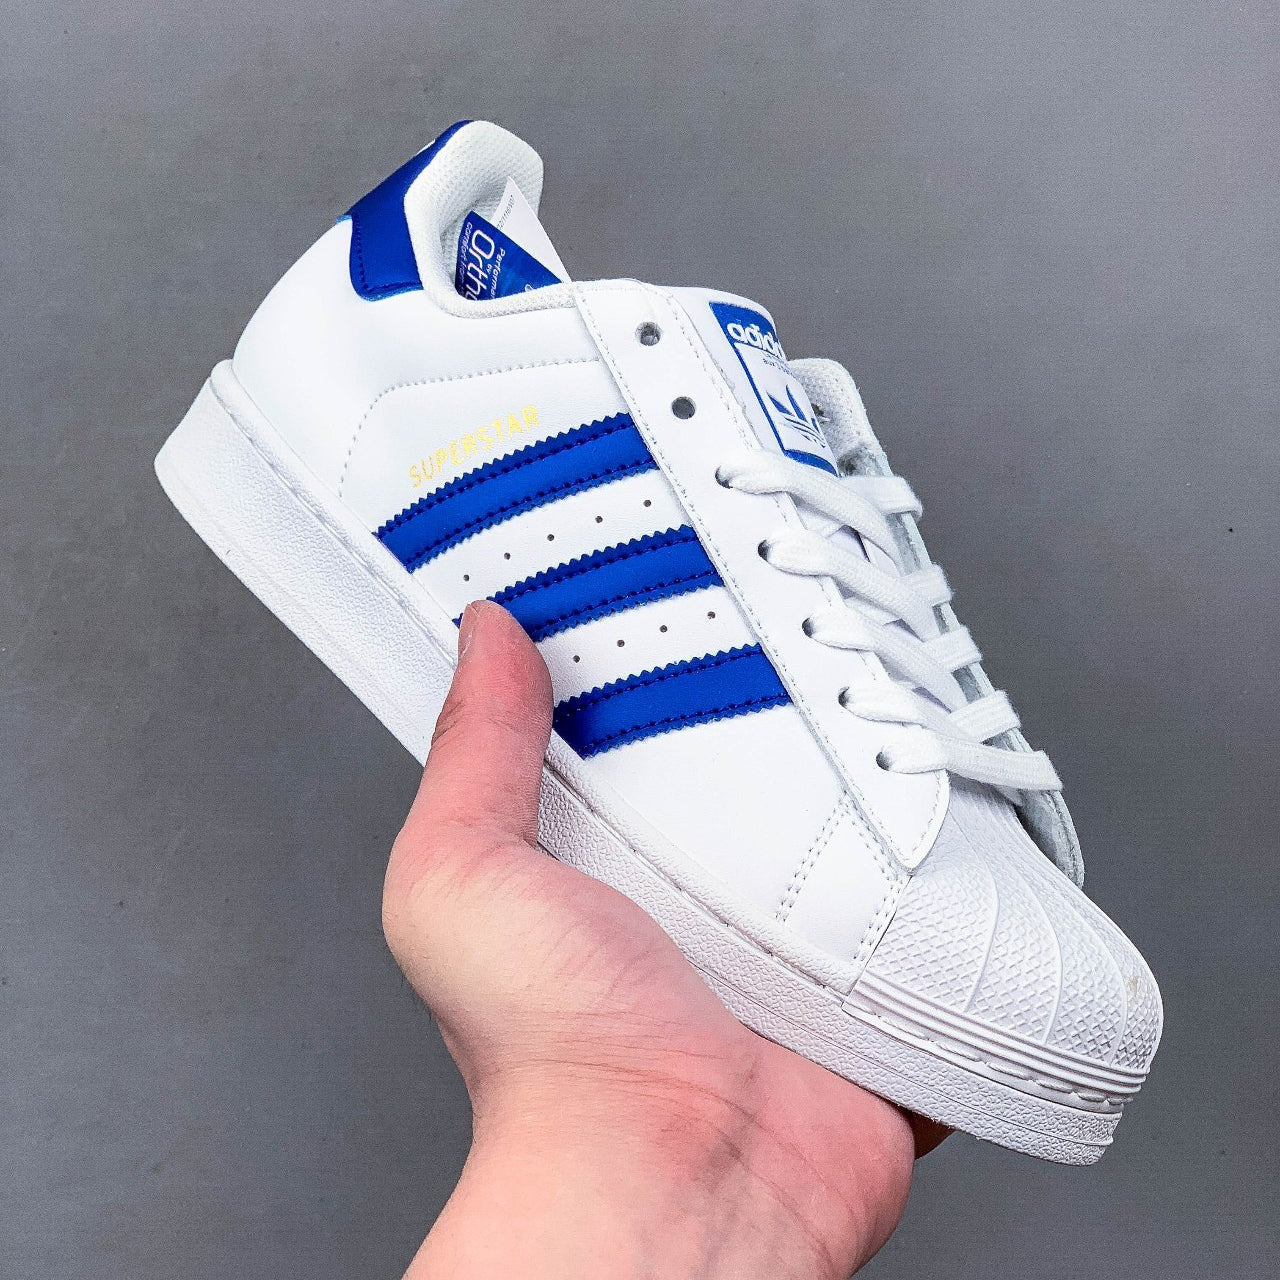 Adidas SUPERSTAR Shell Toe Versatile Casual Sneakers Shoes